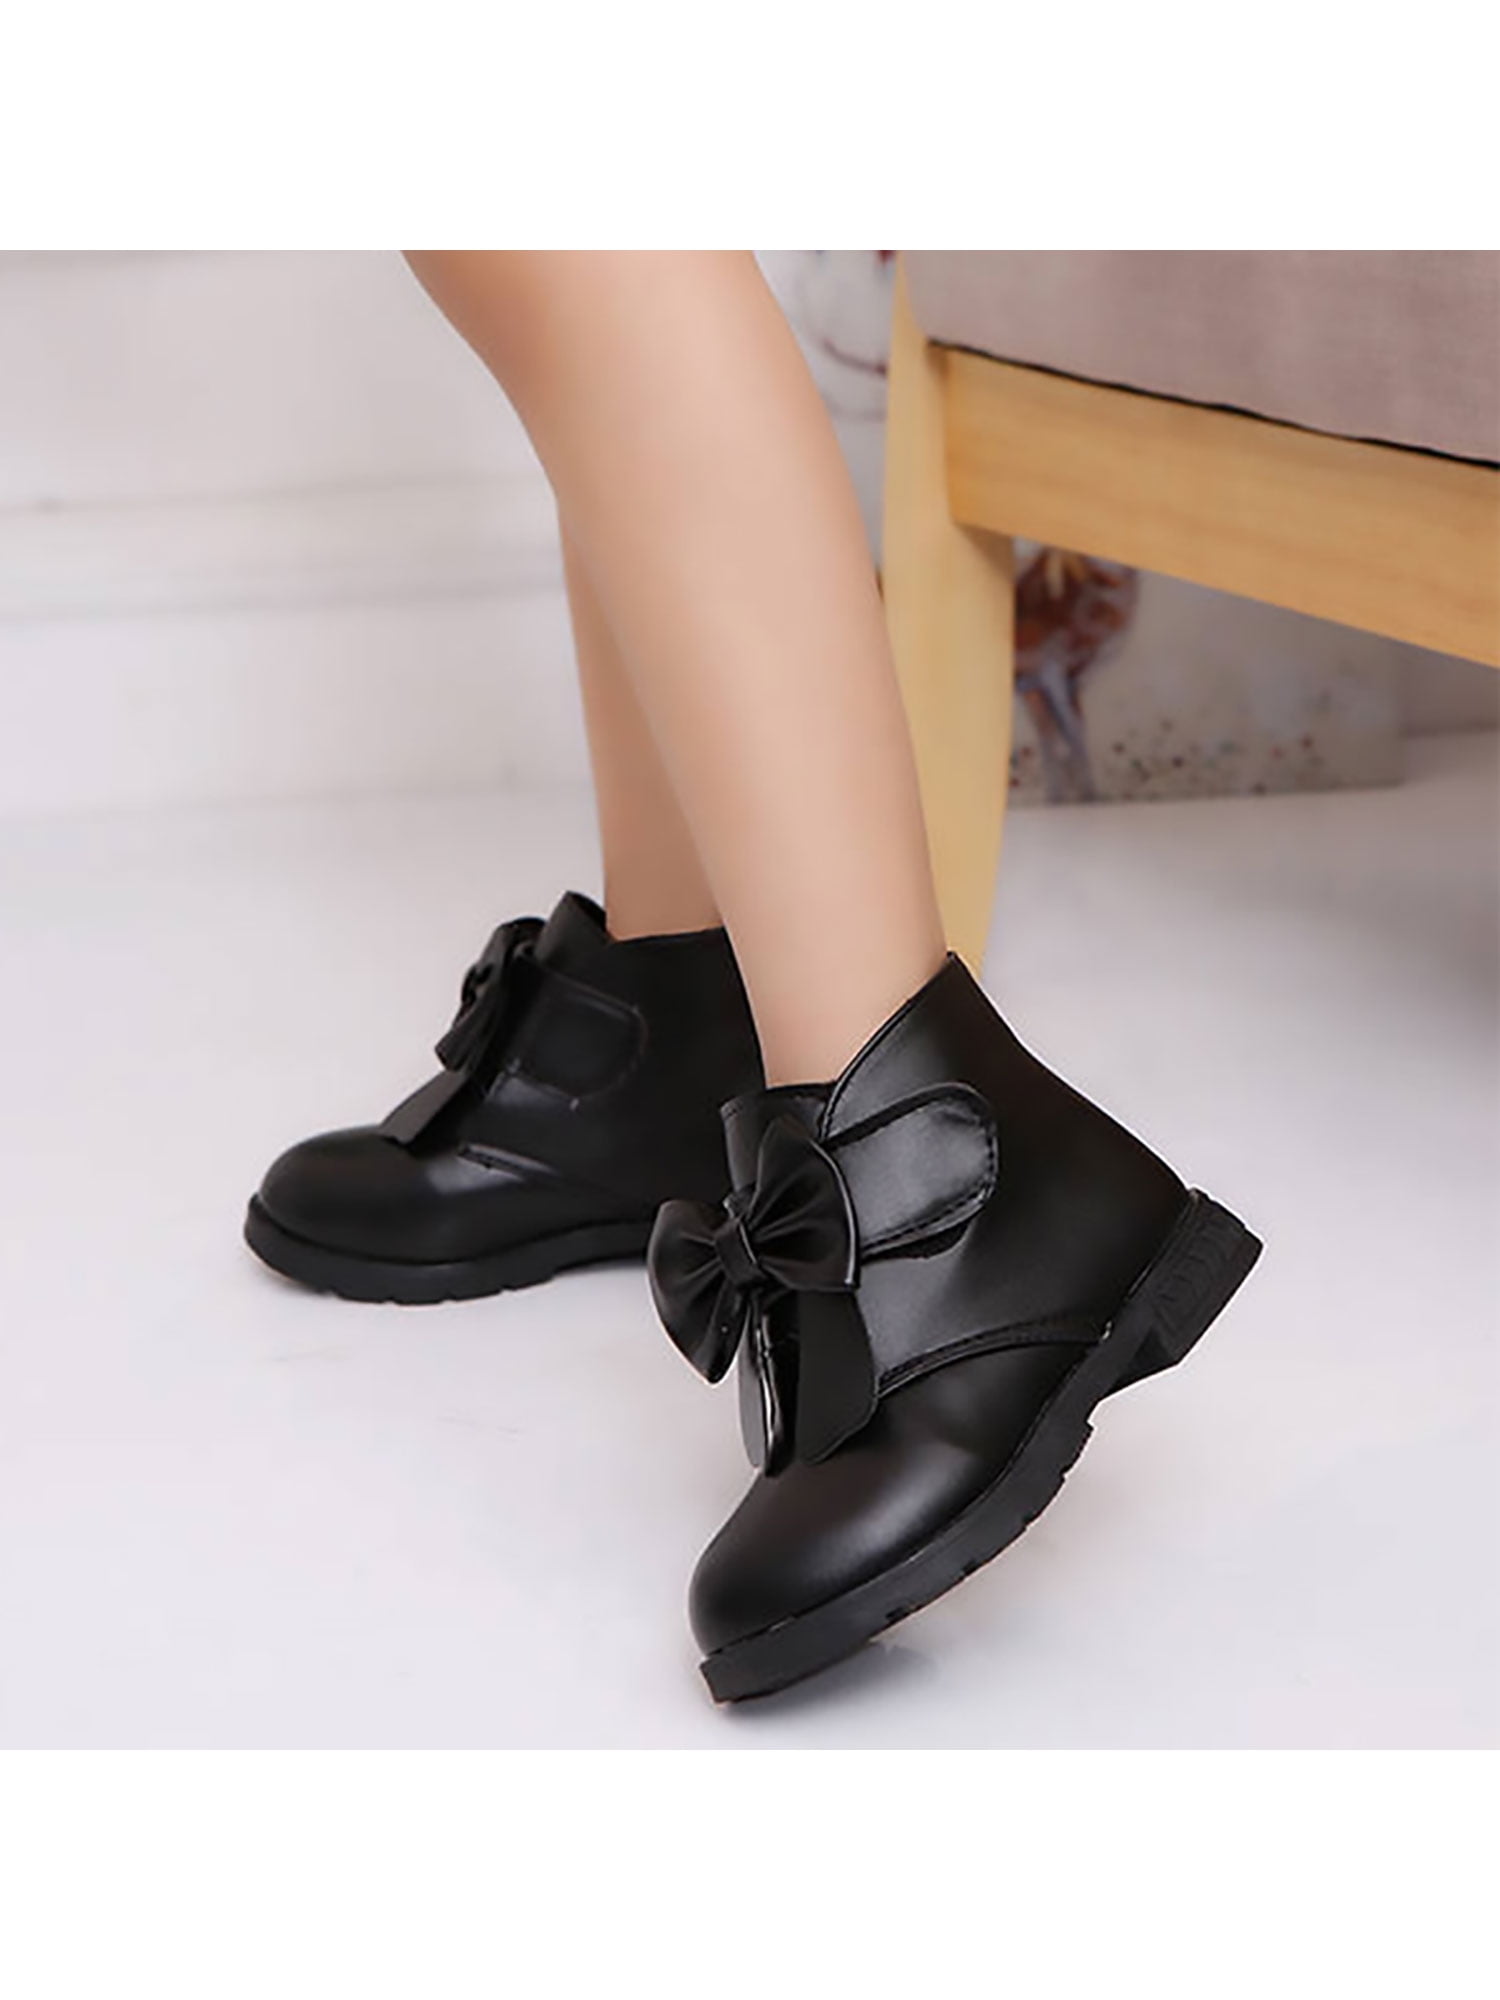 Latest Collection Casual Boots For girls High heel boots for women without heels  boots for women